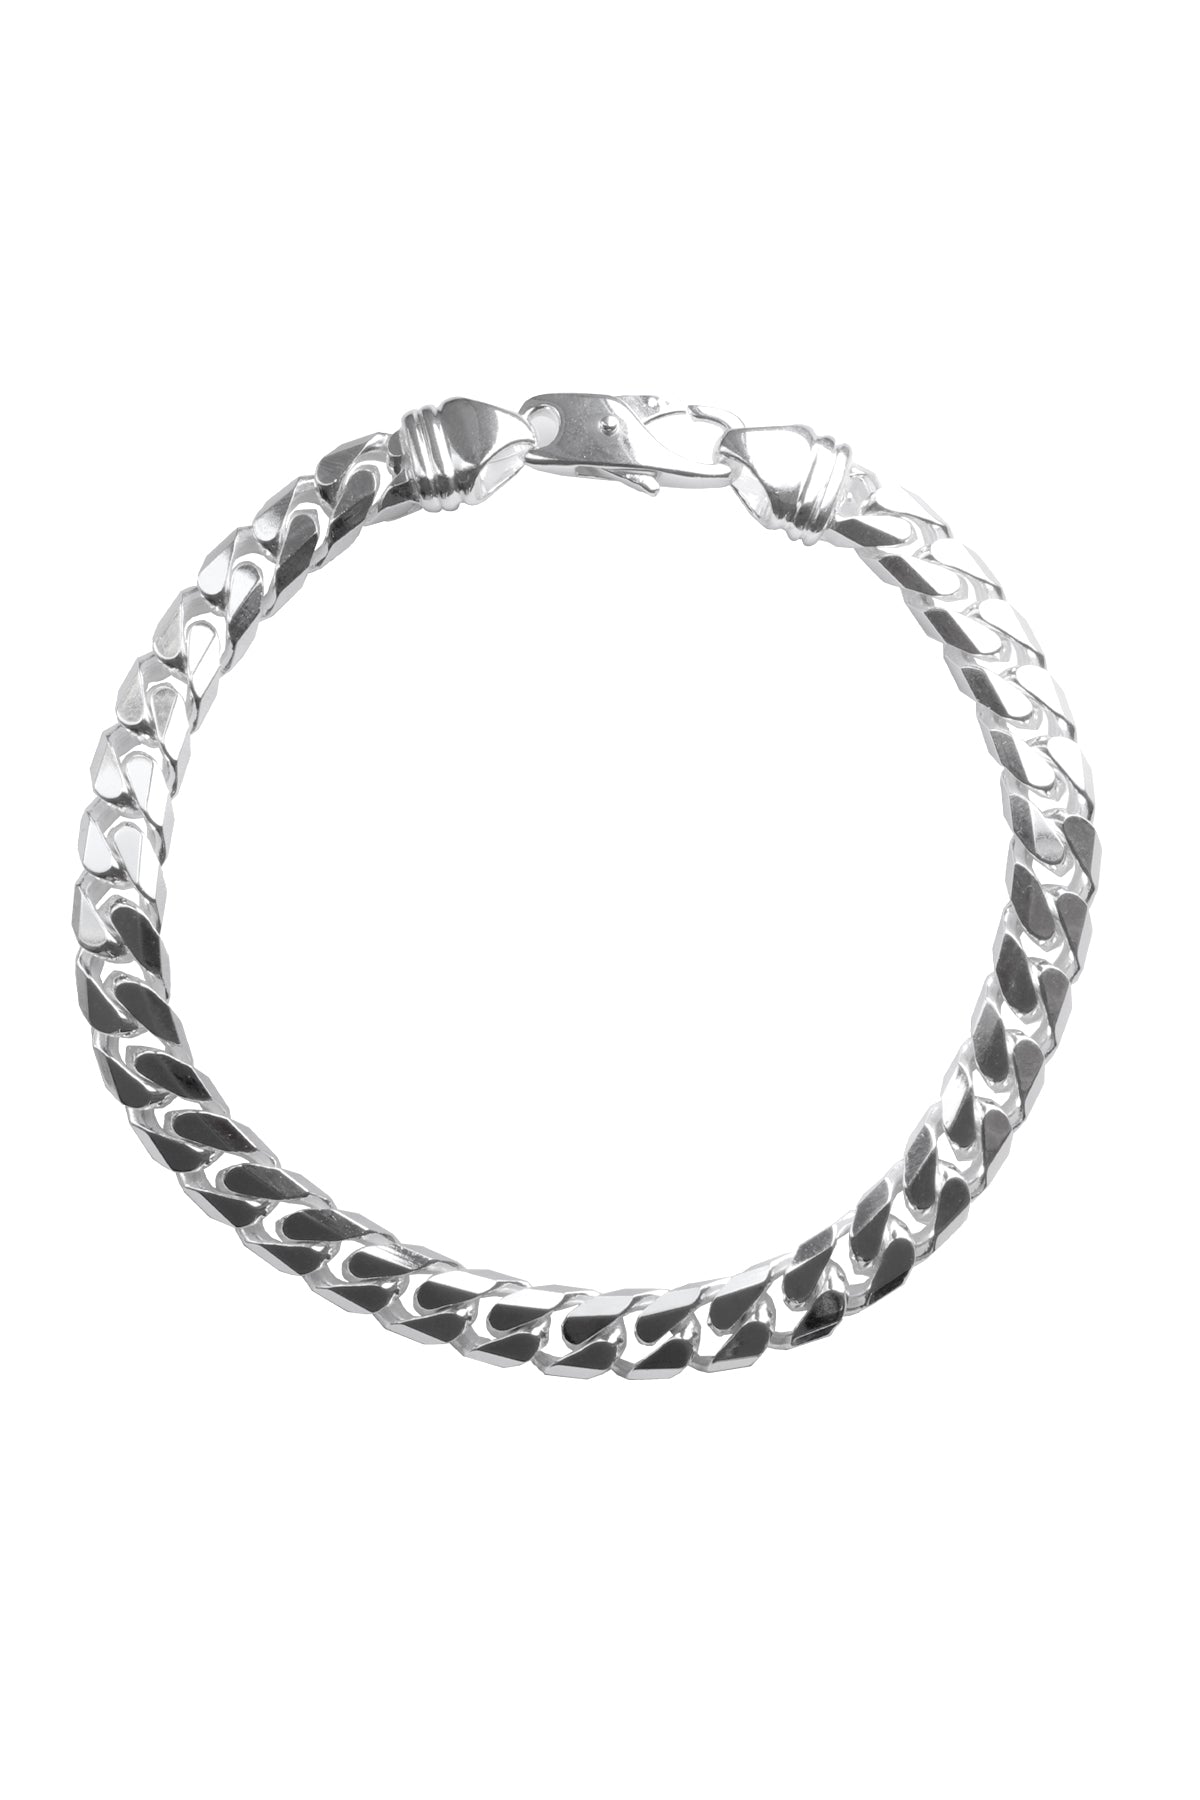 fcity.in - Silver Curb Chain And Silver Bracelet Necklace With Hug Ring For  Men